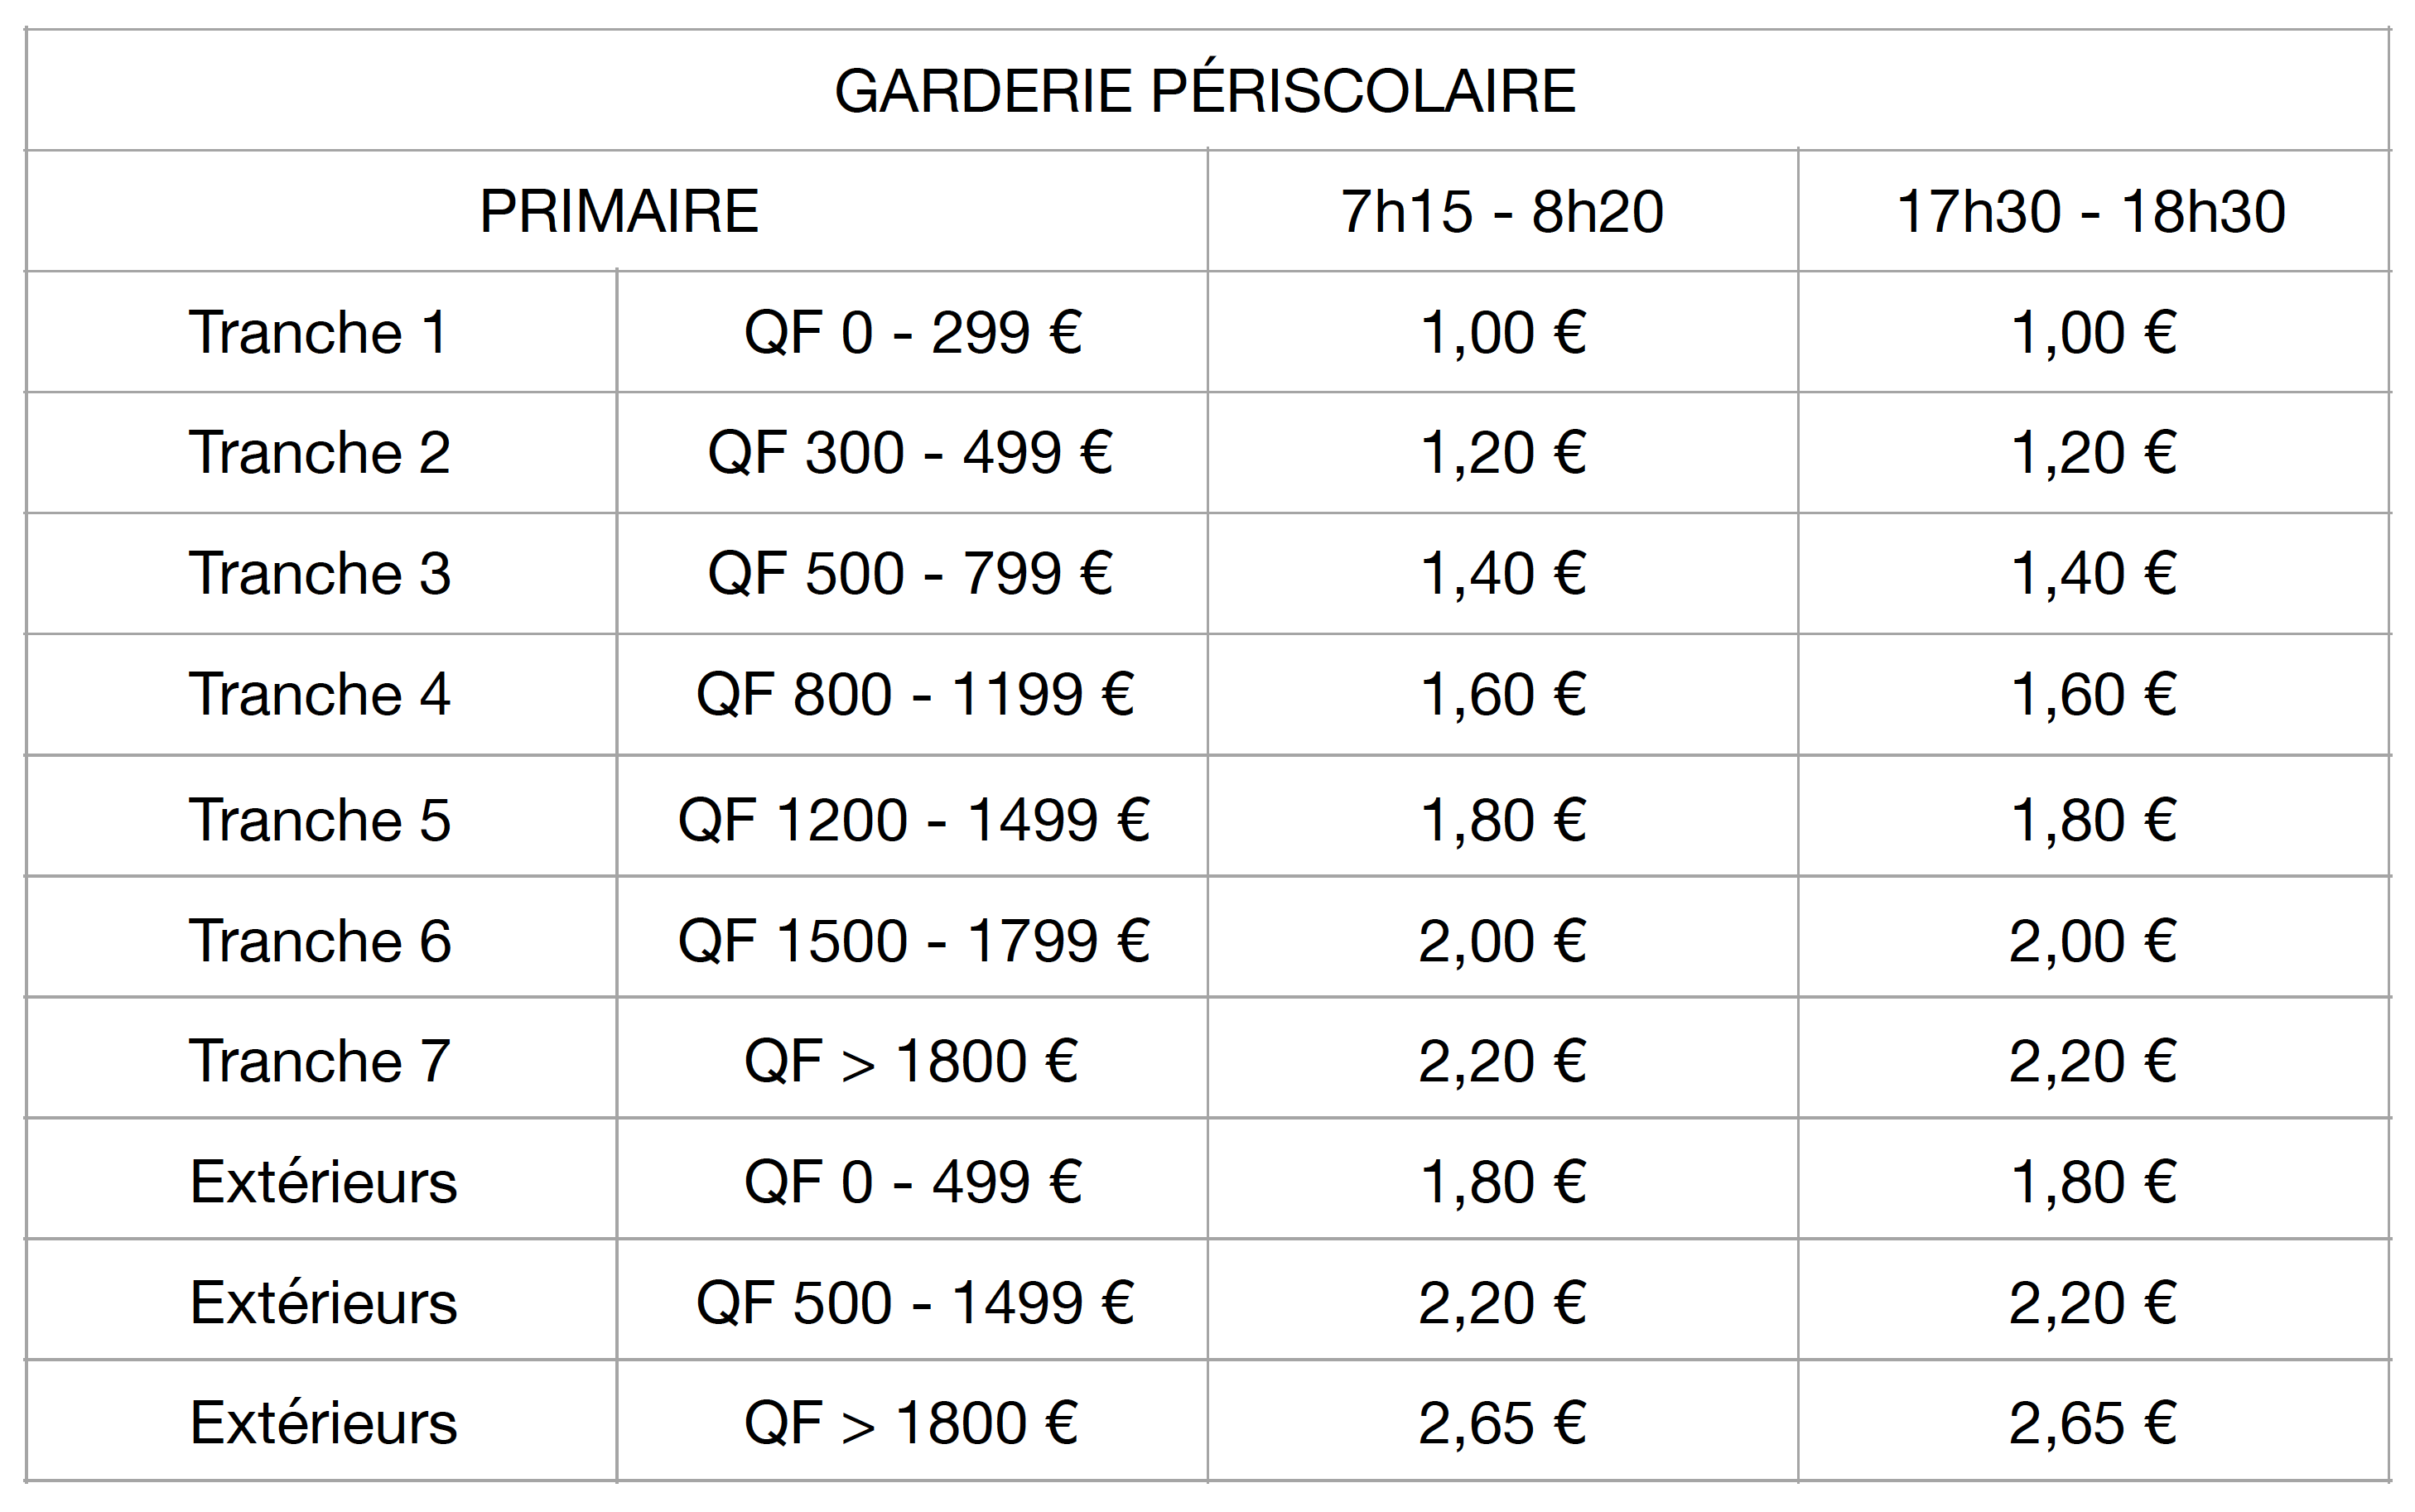 Tarifs garderie periscolaire P 2022.png